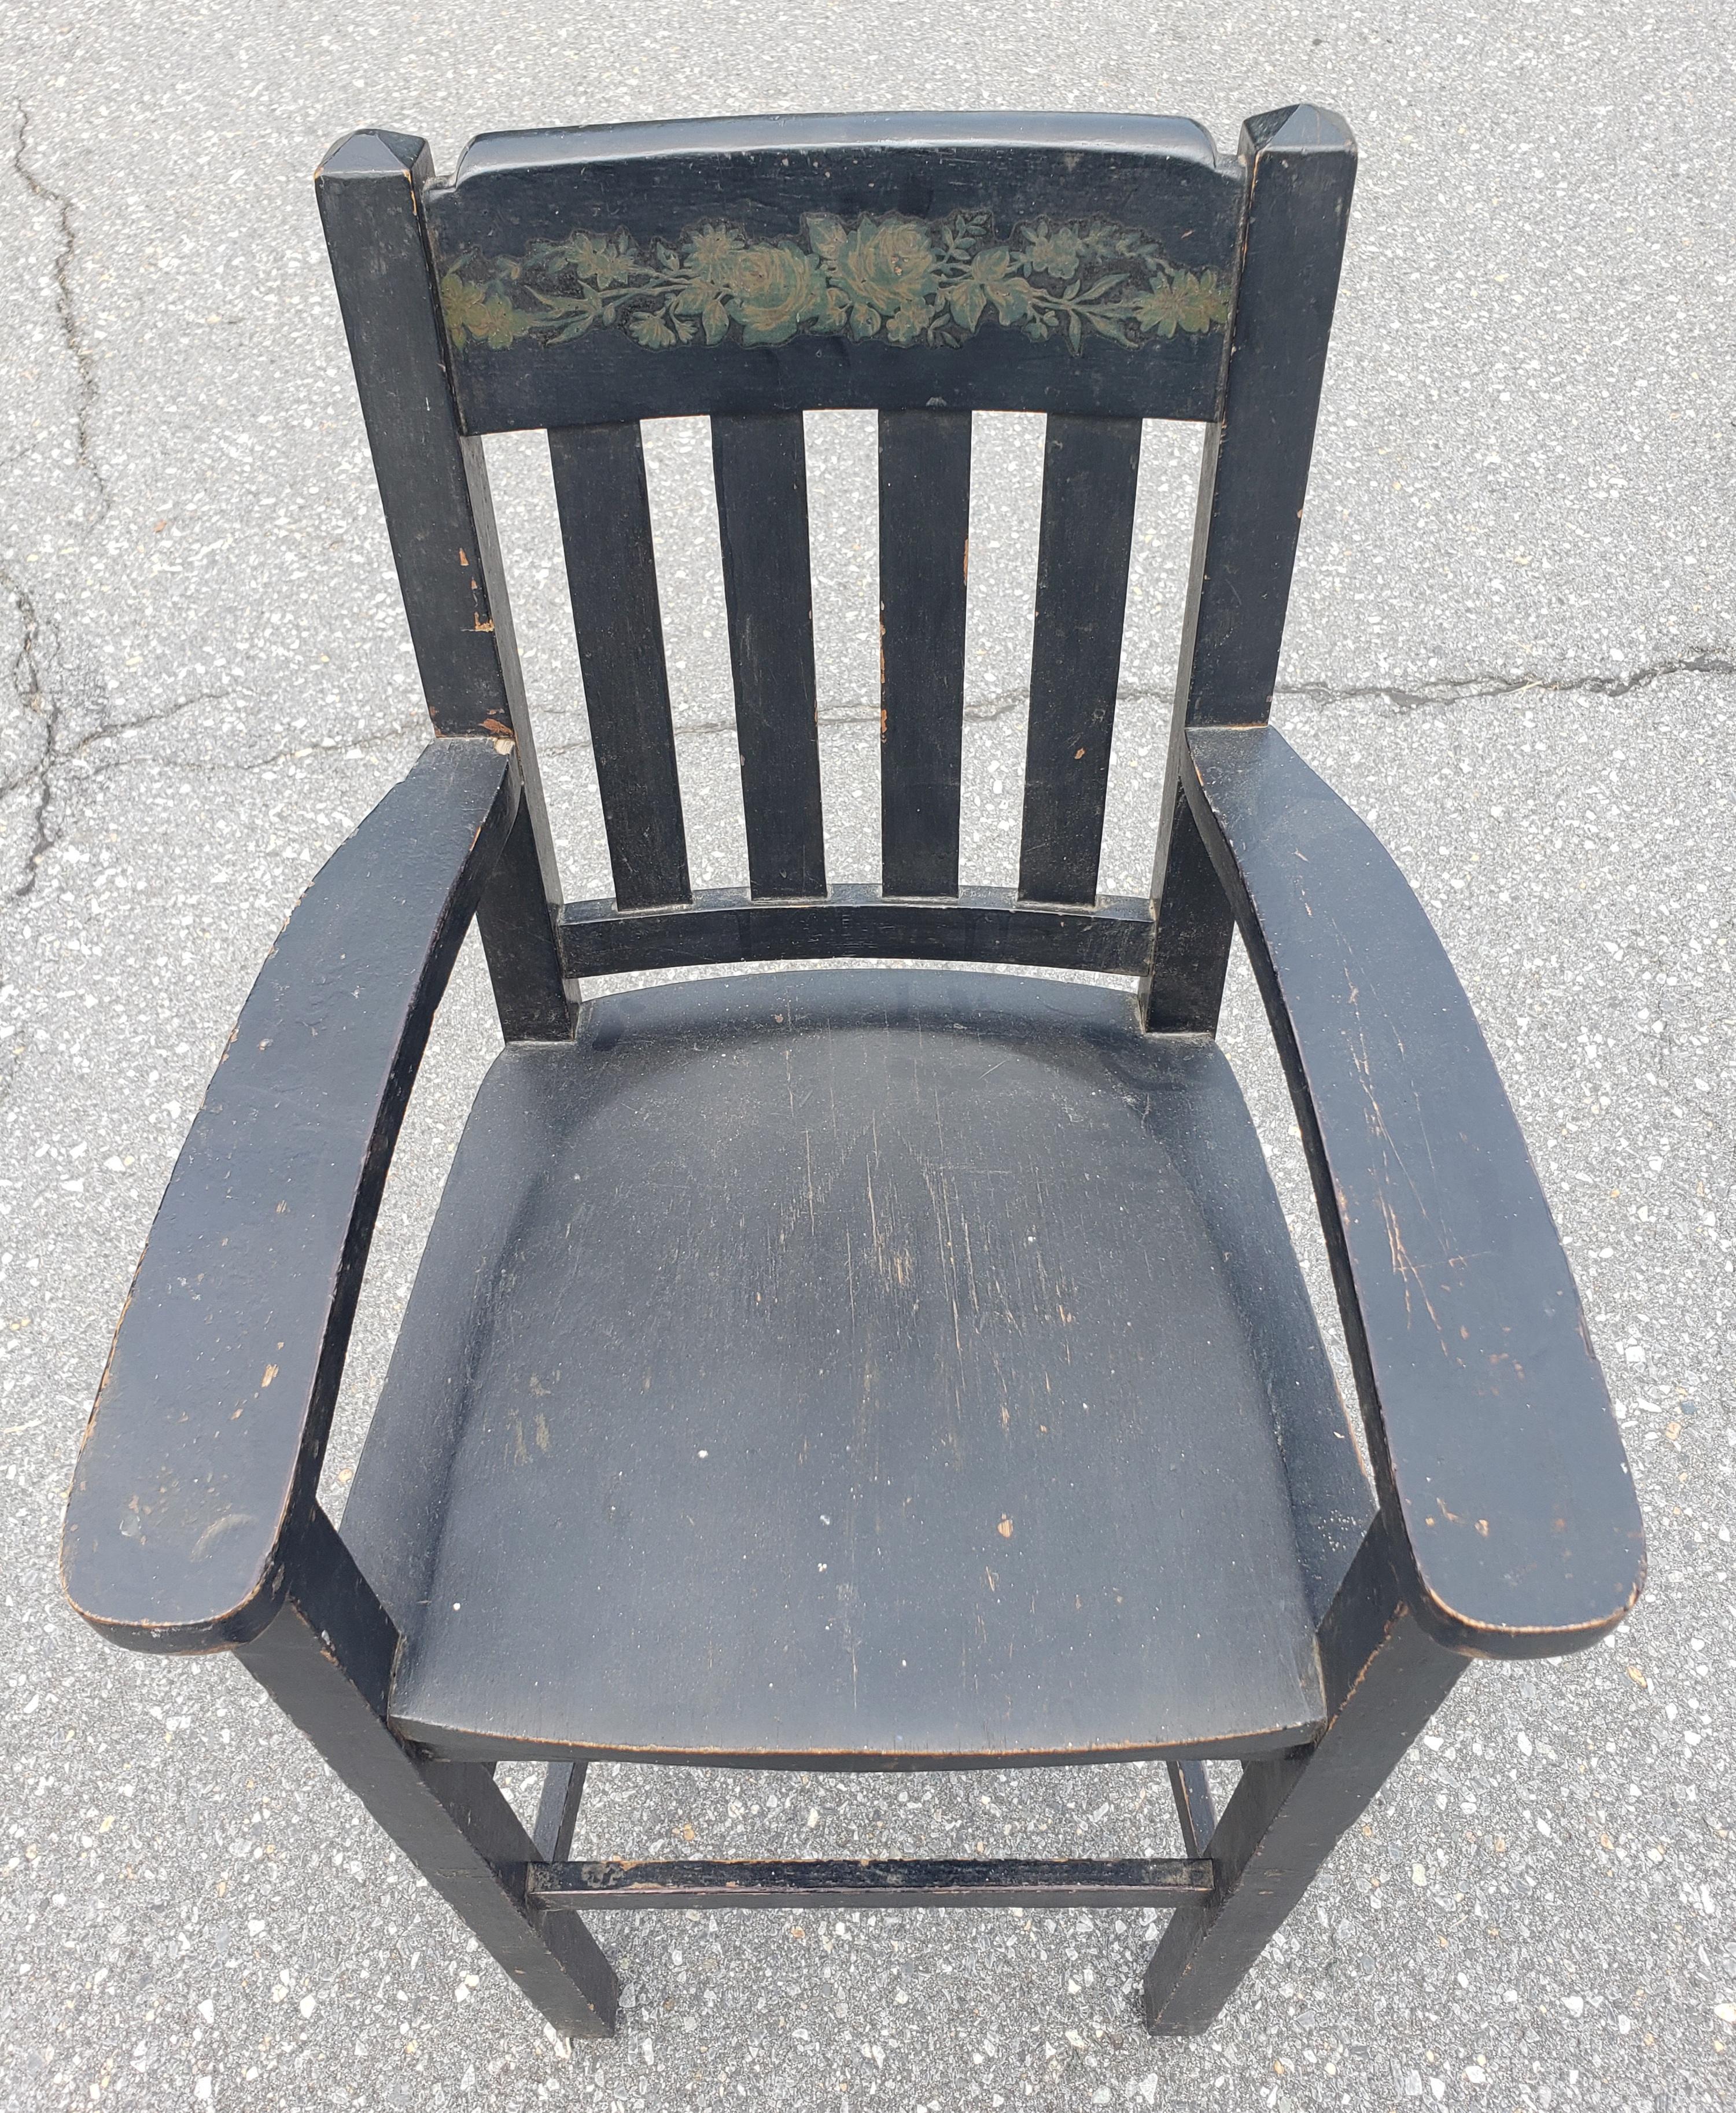 An early 1900s Heywood Brothers and Wakefield Company of Baltimore Ebonized oak and Decorated Youth High Chair in very good sturdy condition and great patina. Measures 17.5